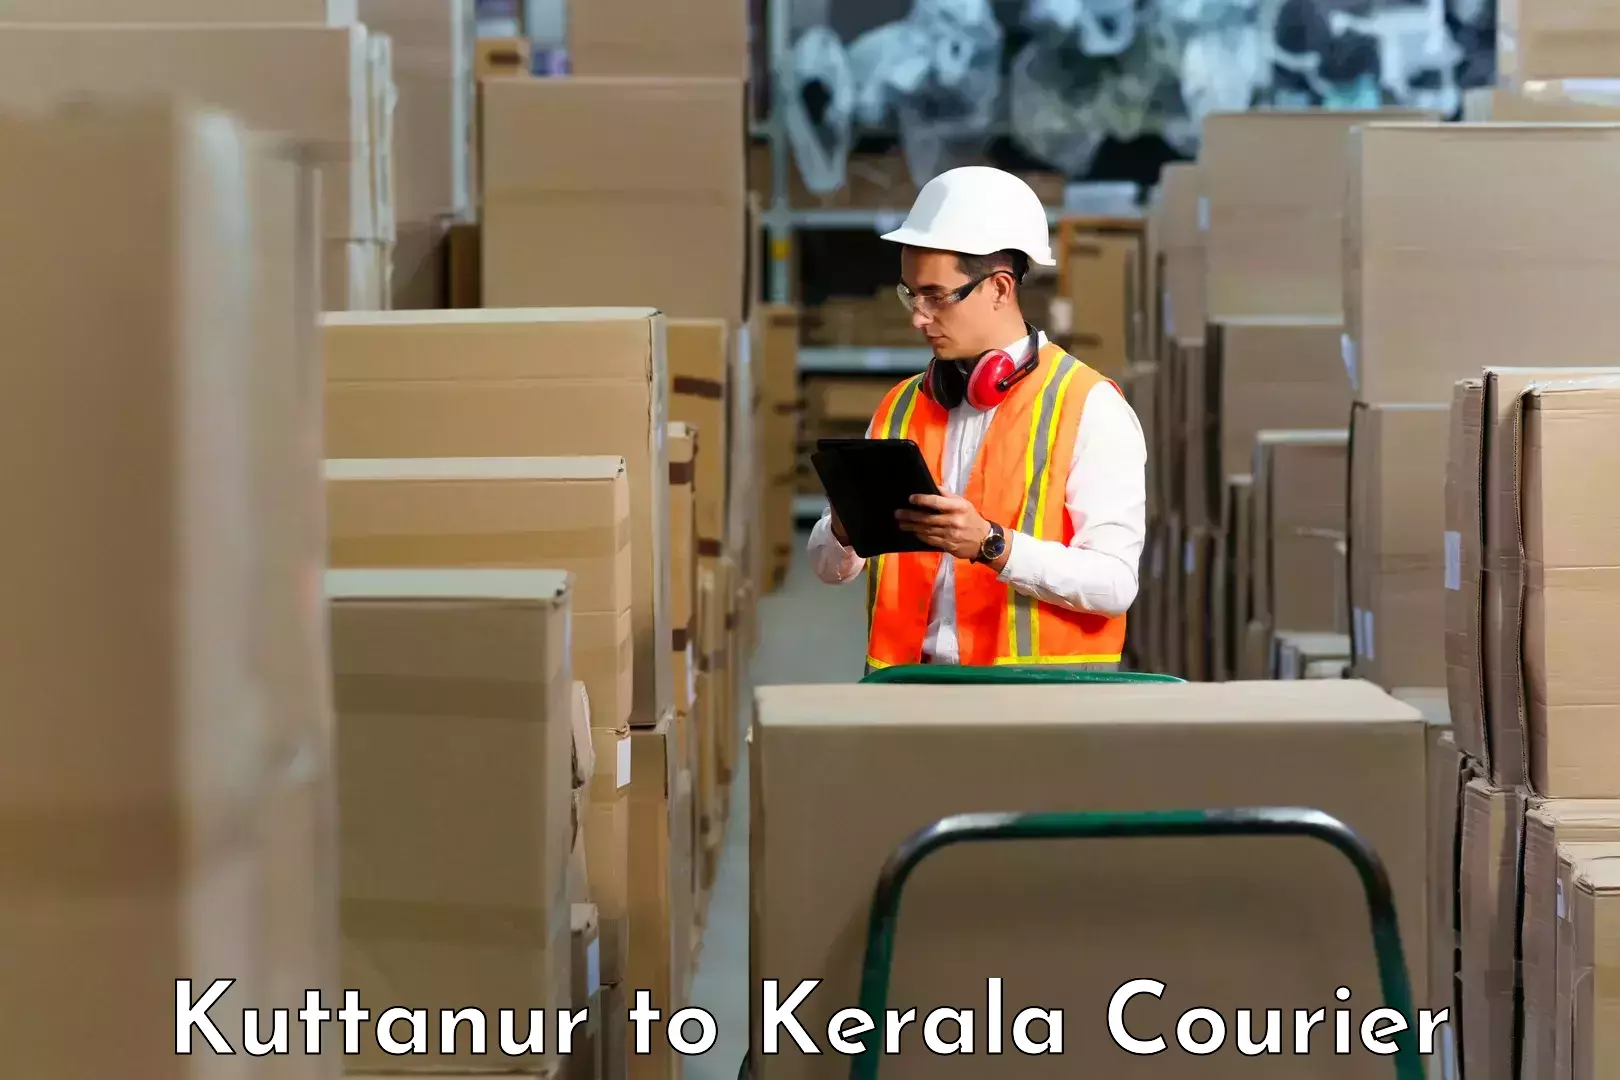 Cargo delivery service Kuttanur to Cochin University of Science and Technology